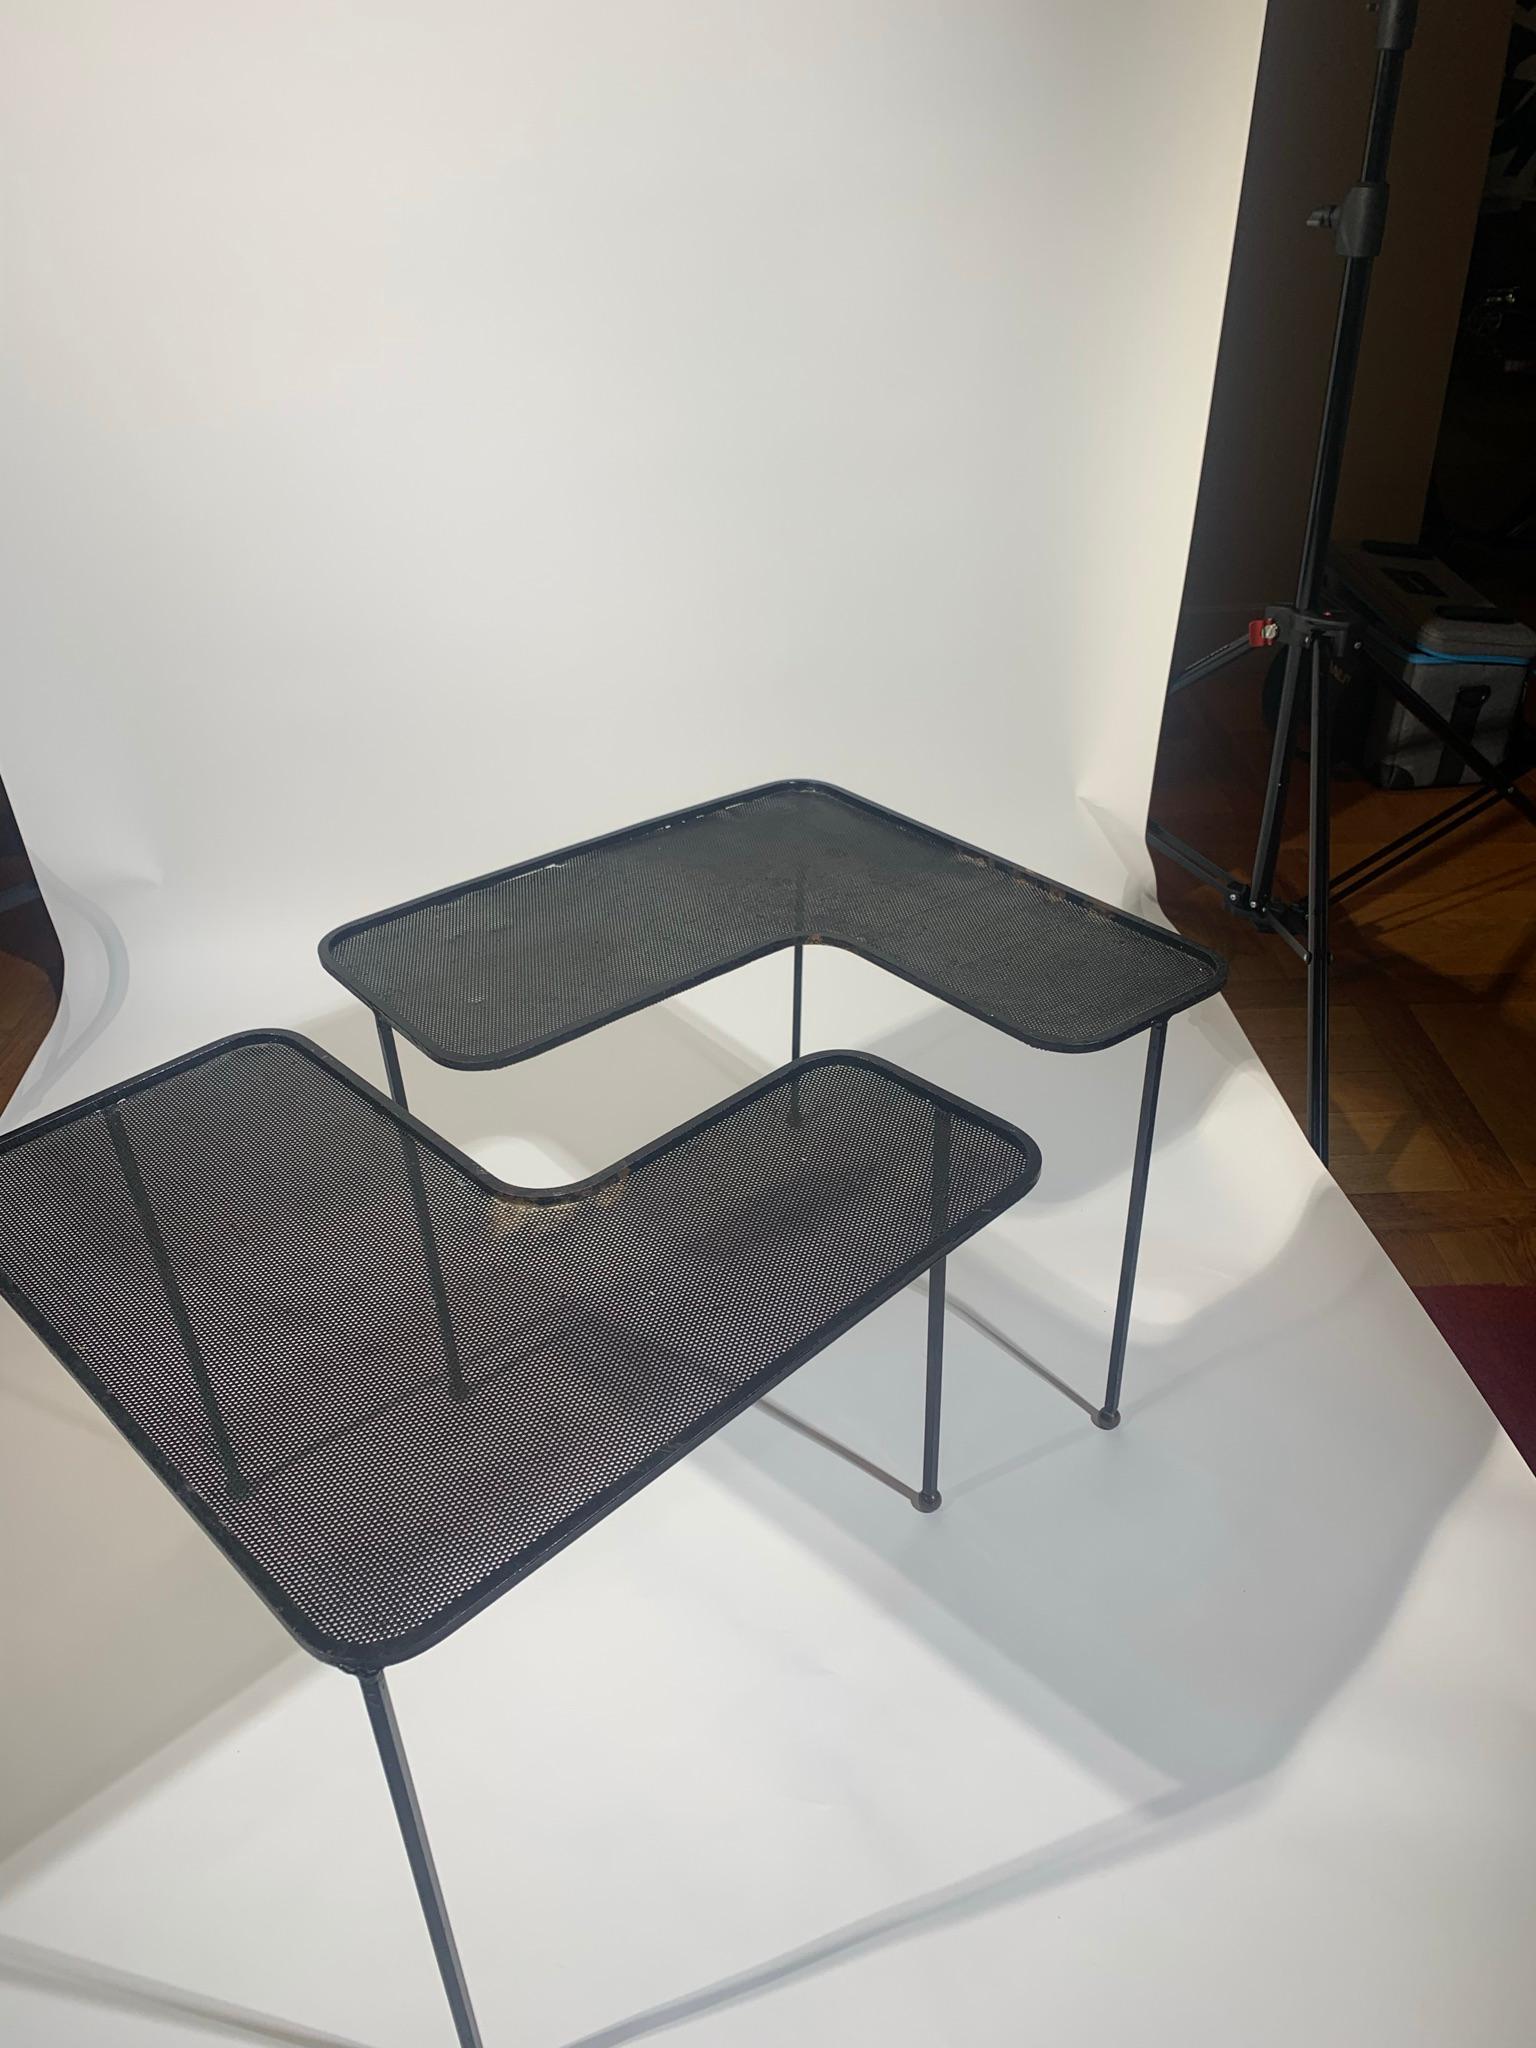 Pair of black perforated sheet metal table says Domino by M. Mategot.